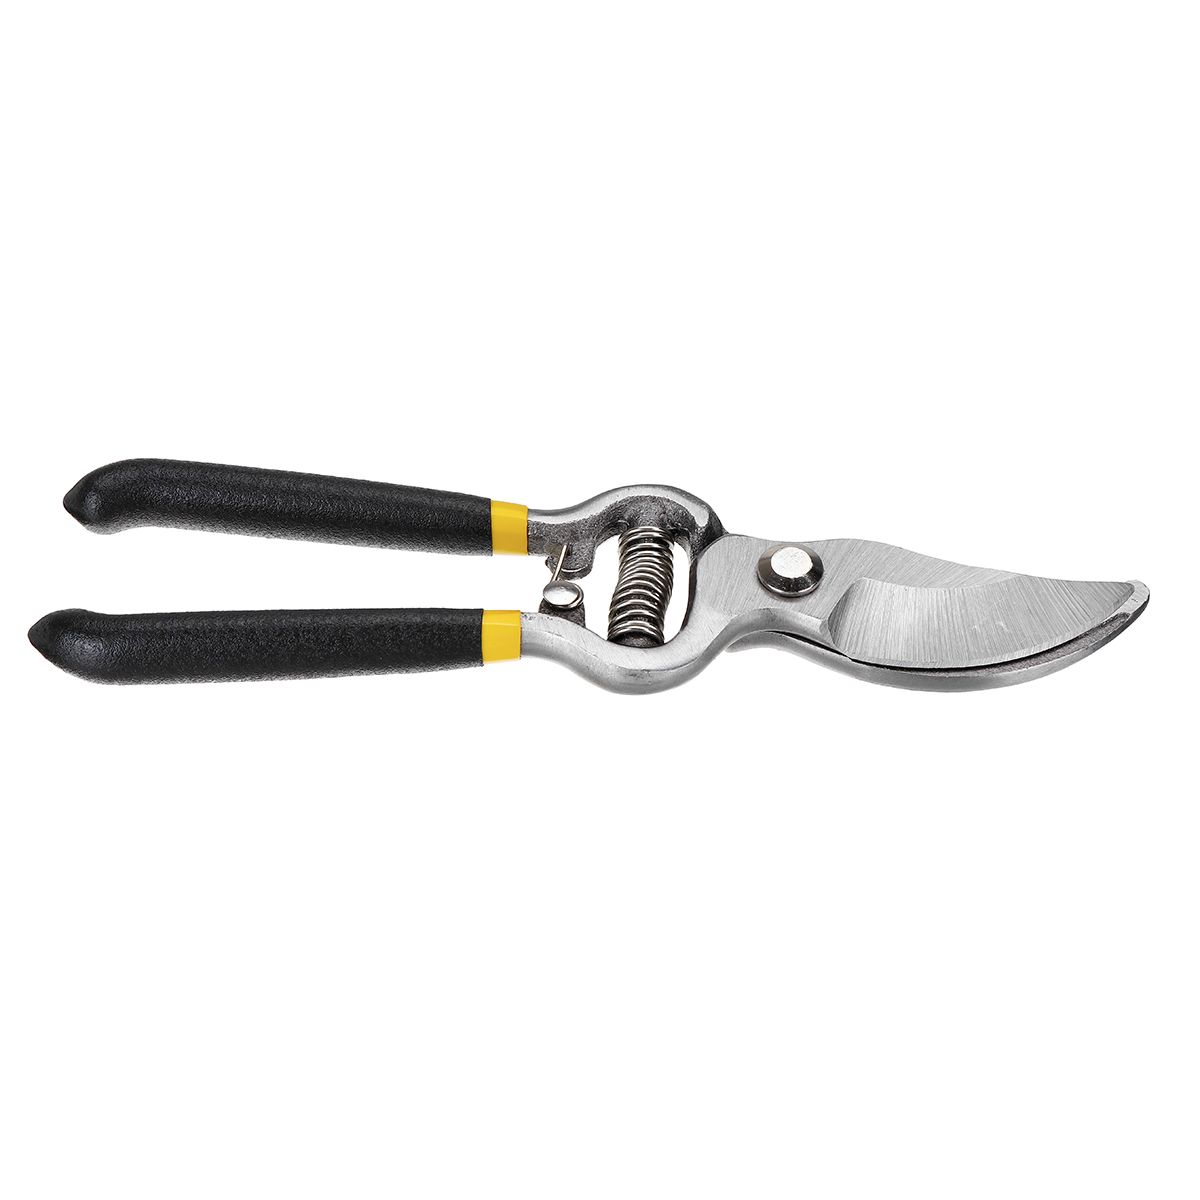 8inch-Carbon-Steel-Professional-Loppers-Garden-Cutter-Bypass-Tree-Pruning-Shears-Clippers-1412616